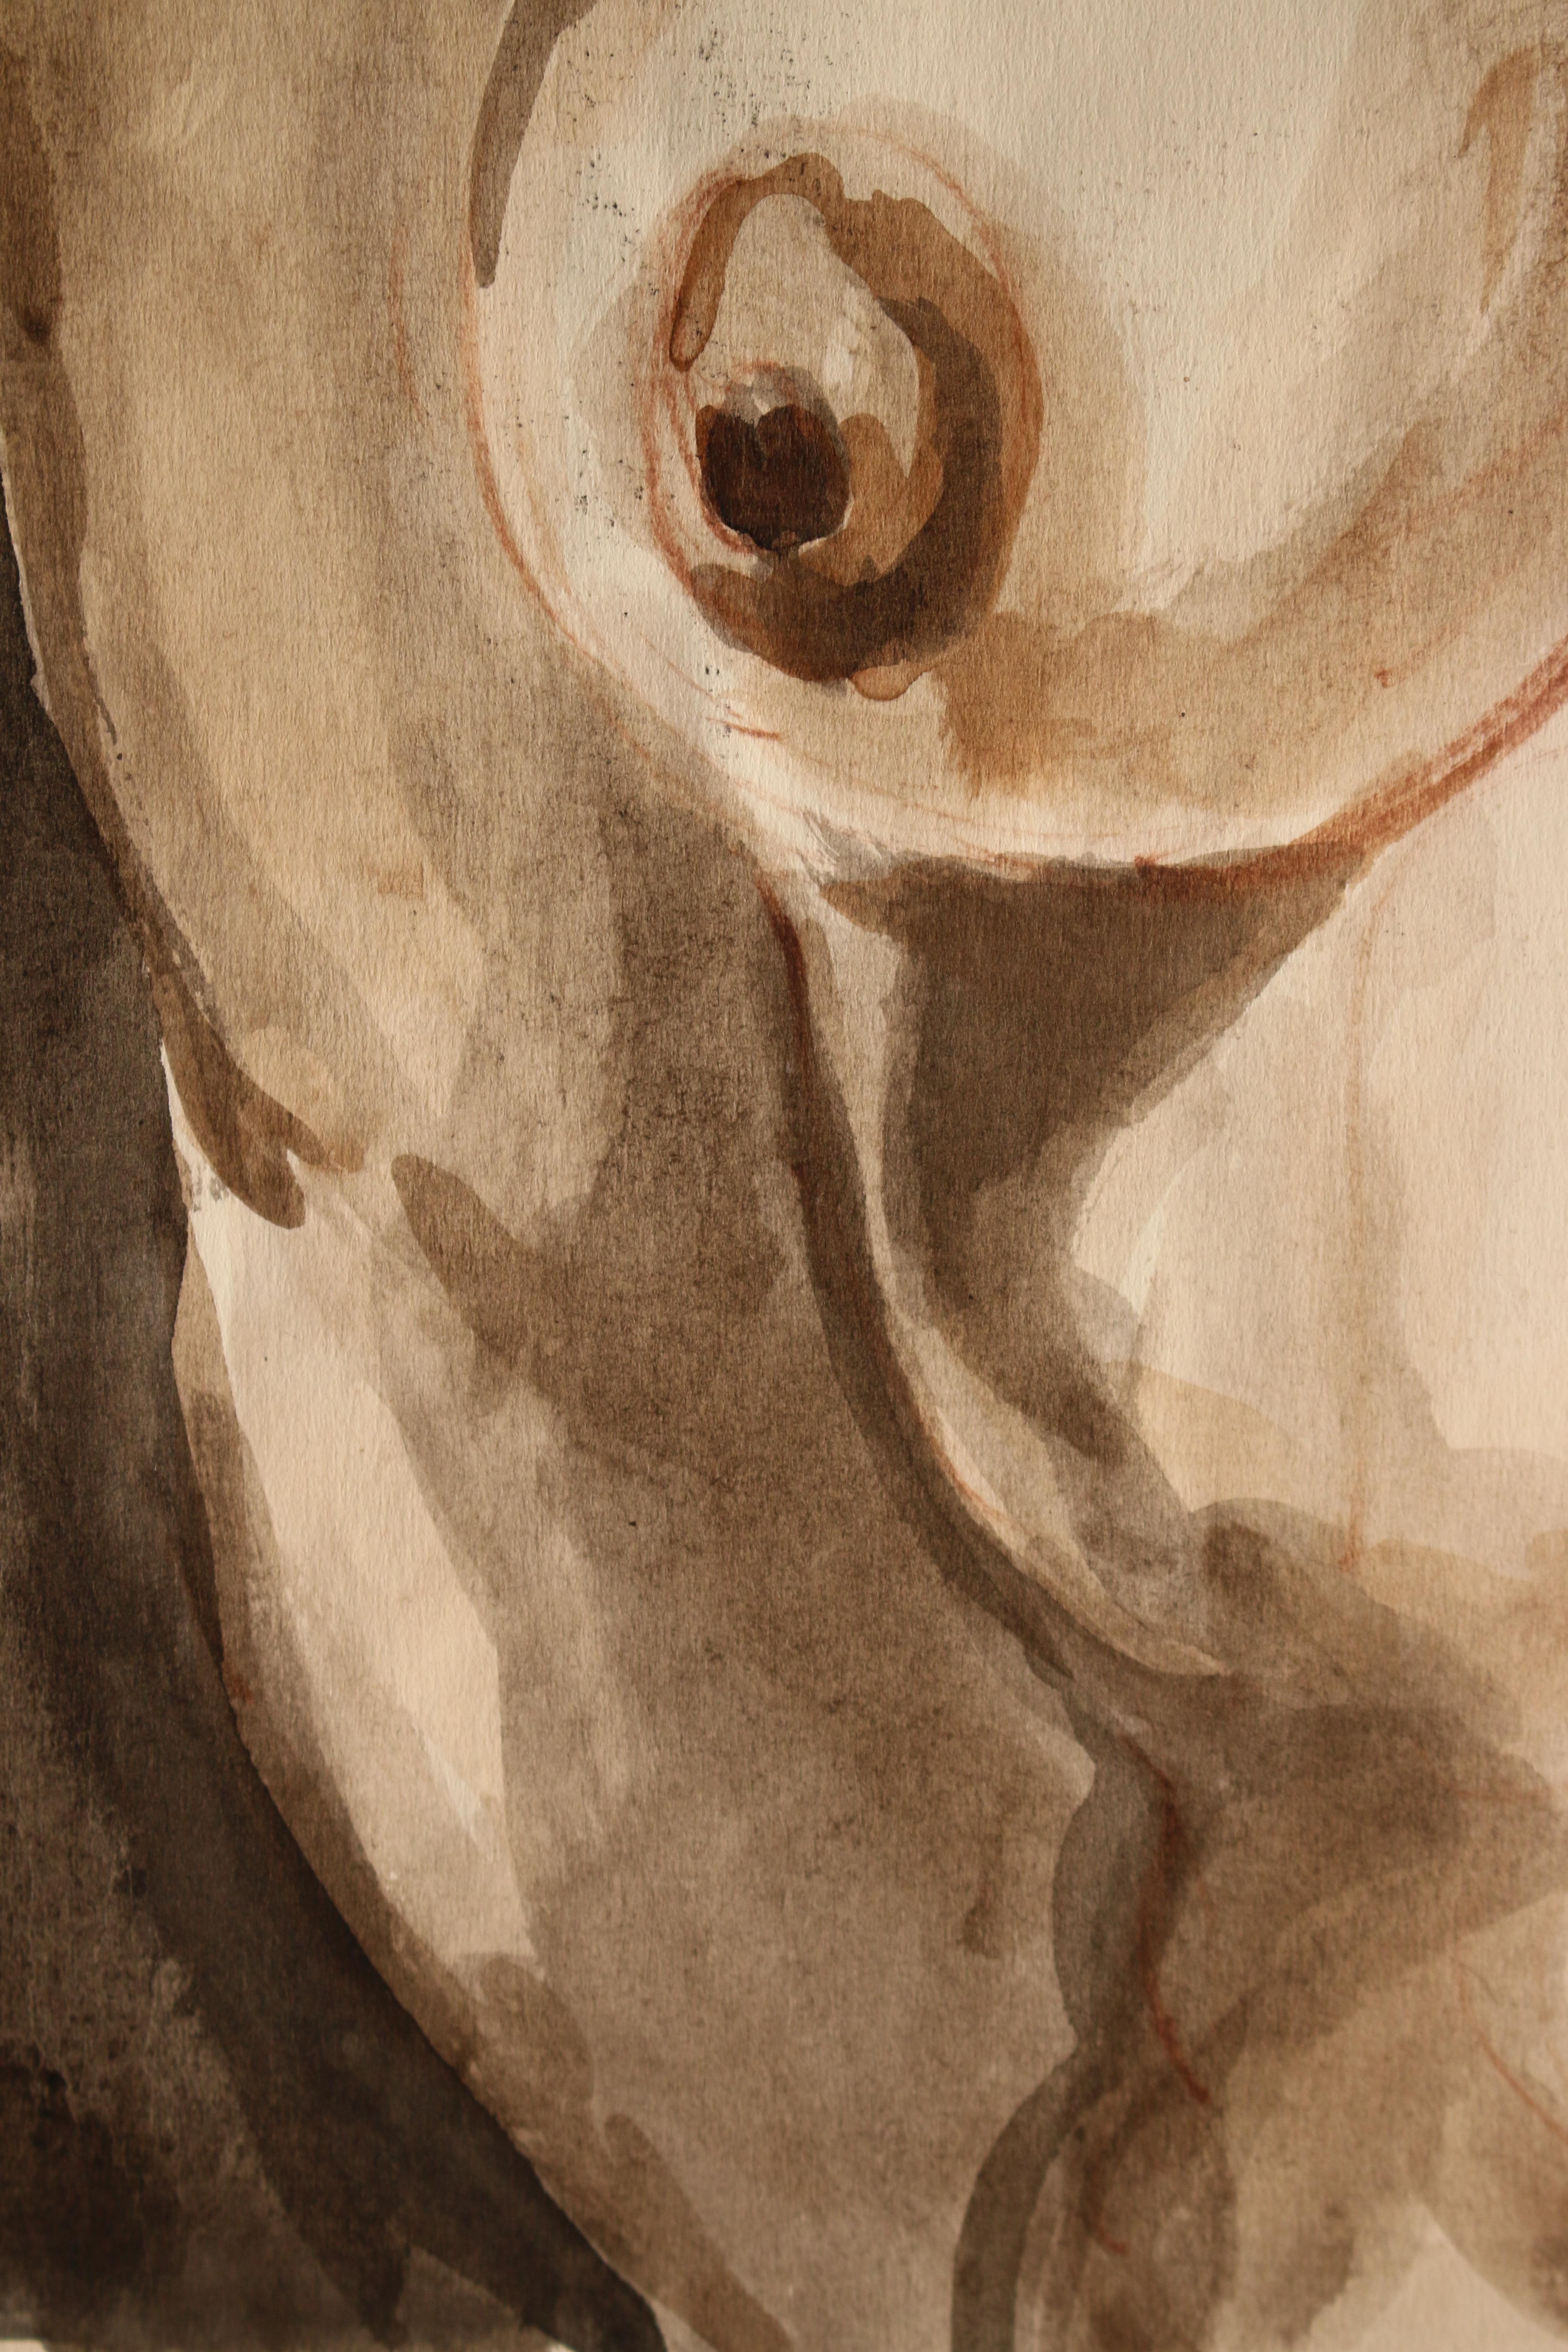 Untitled: Front Nude Watercolor - Brown Figurative Art by Unknown